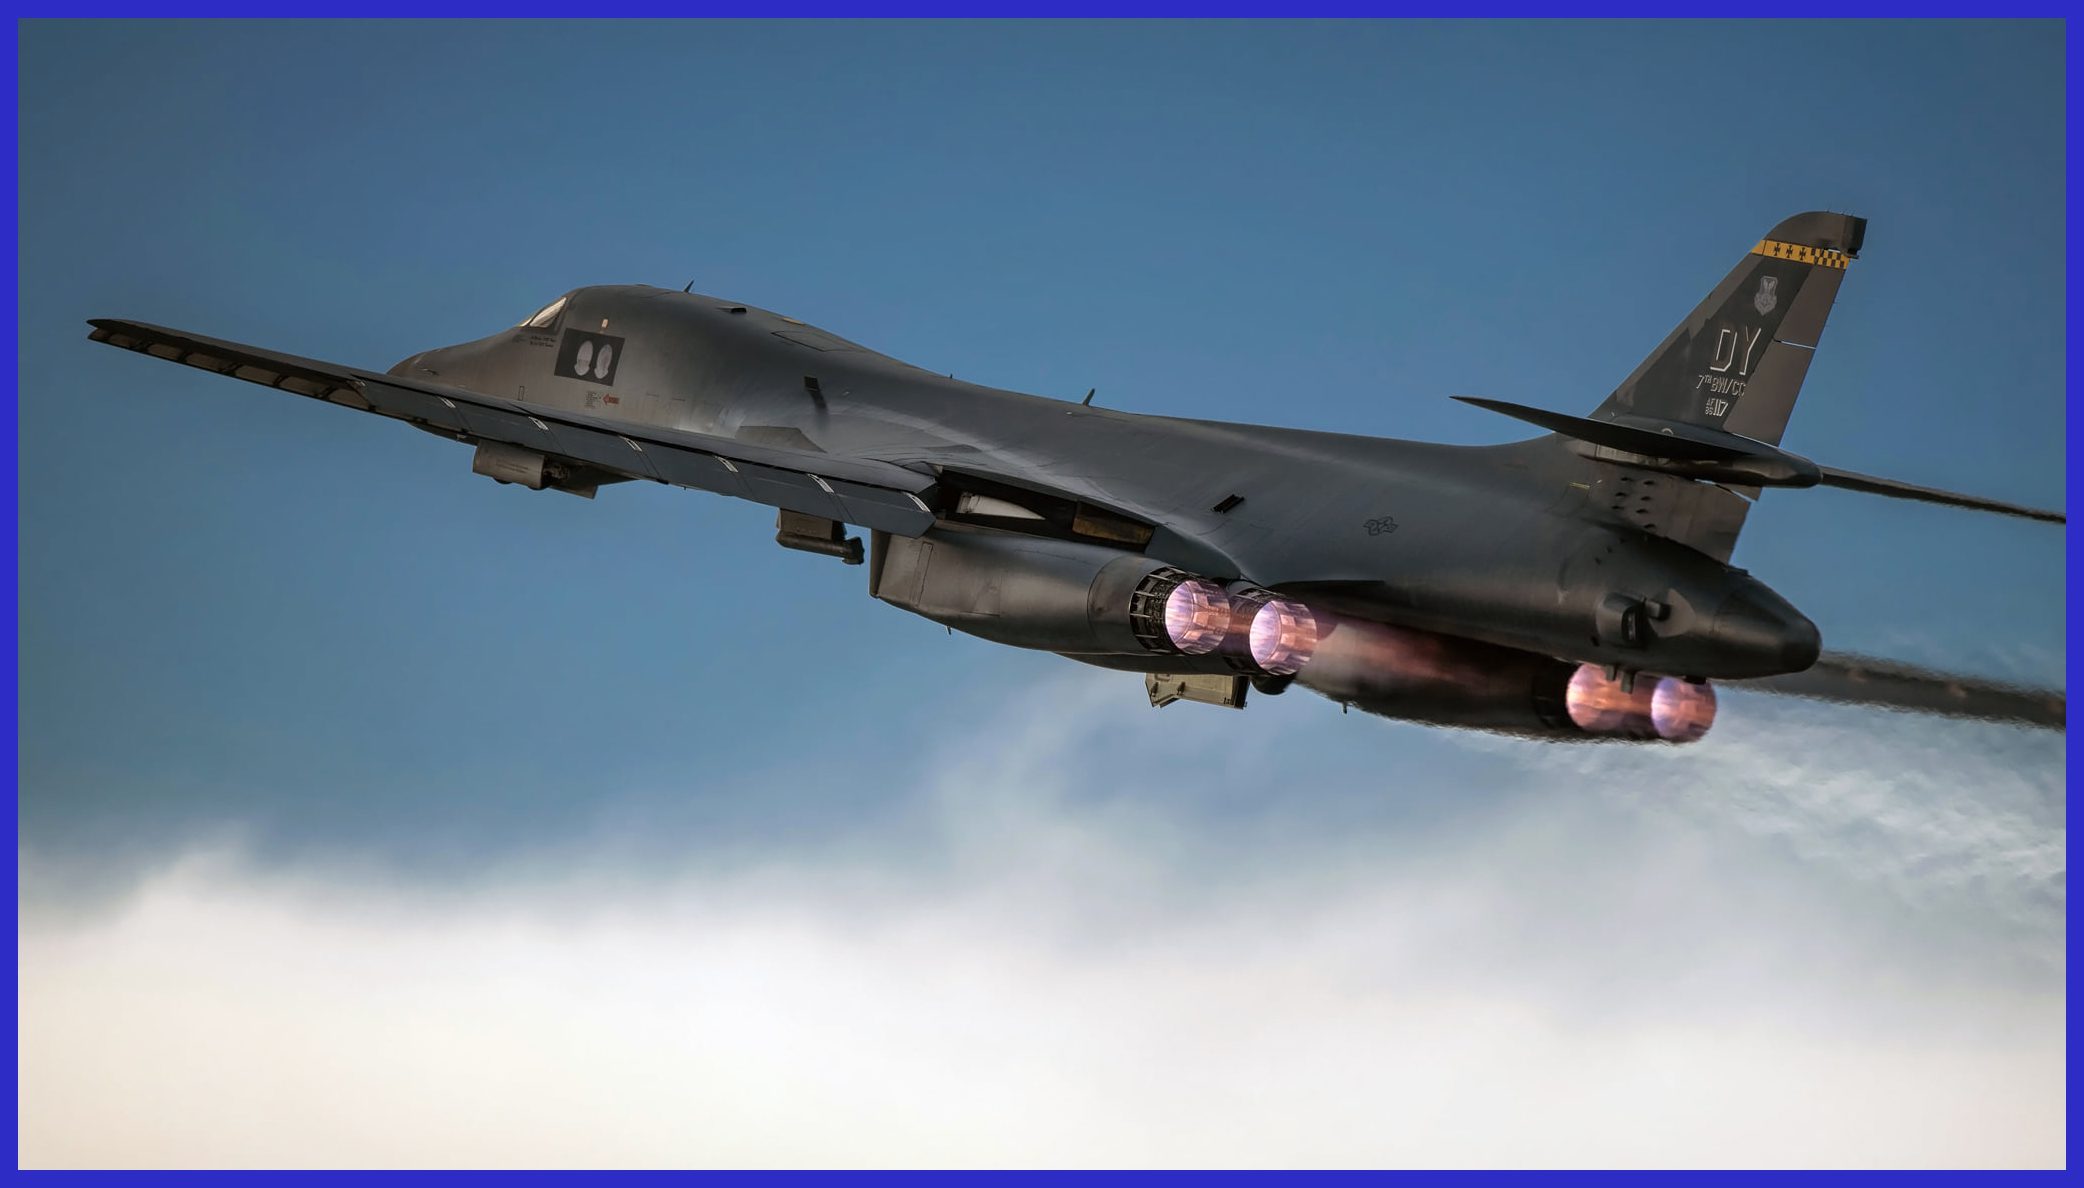 Photo Credit: Hesja Air-Art Photography / Rockwell B-1B Lancer from Dyess Air Force Base.